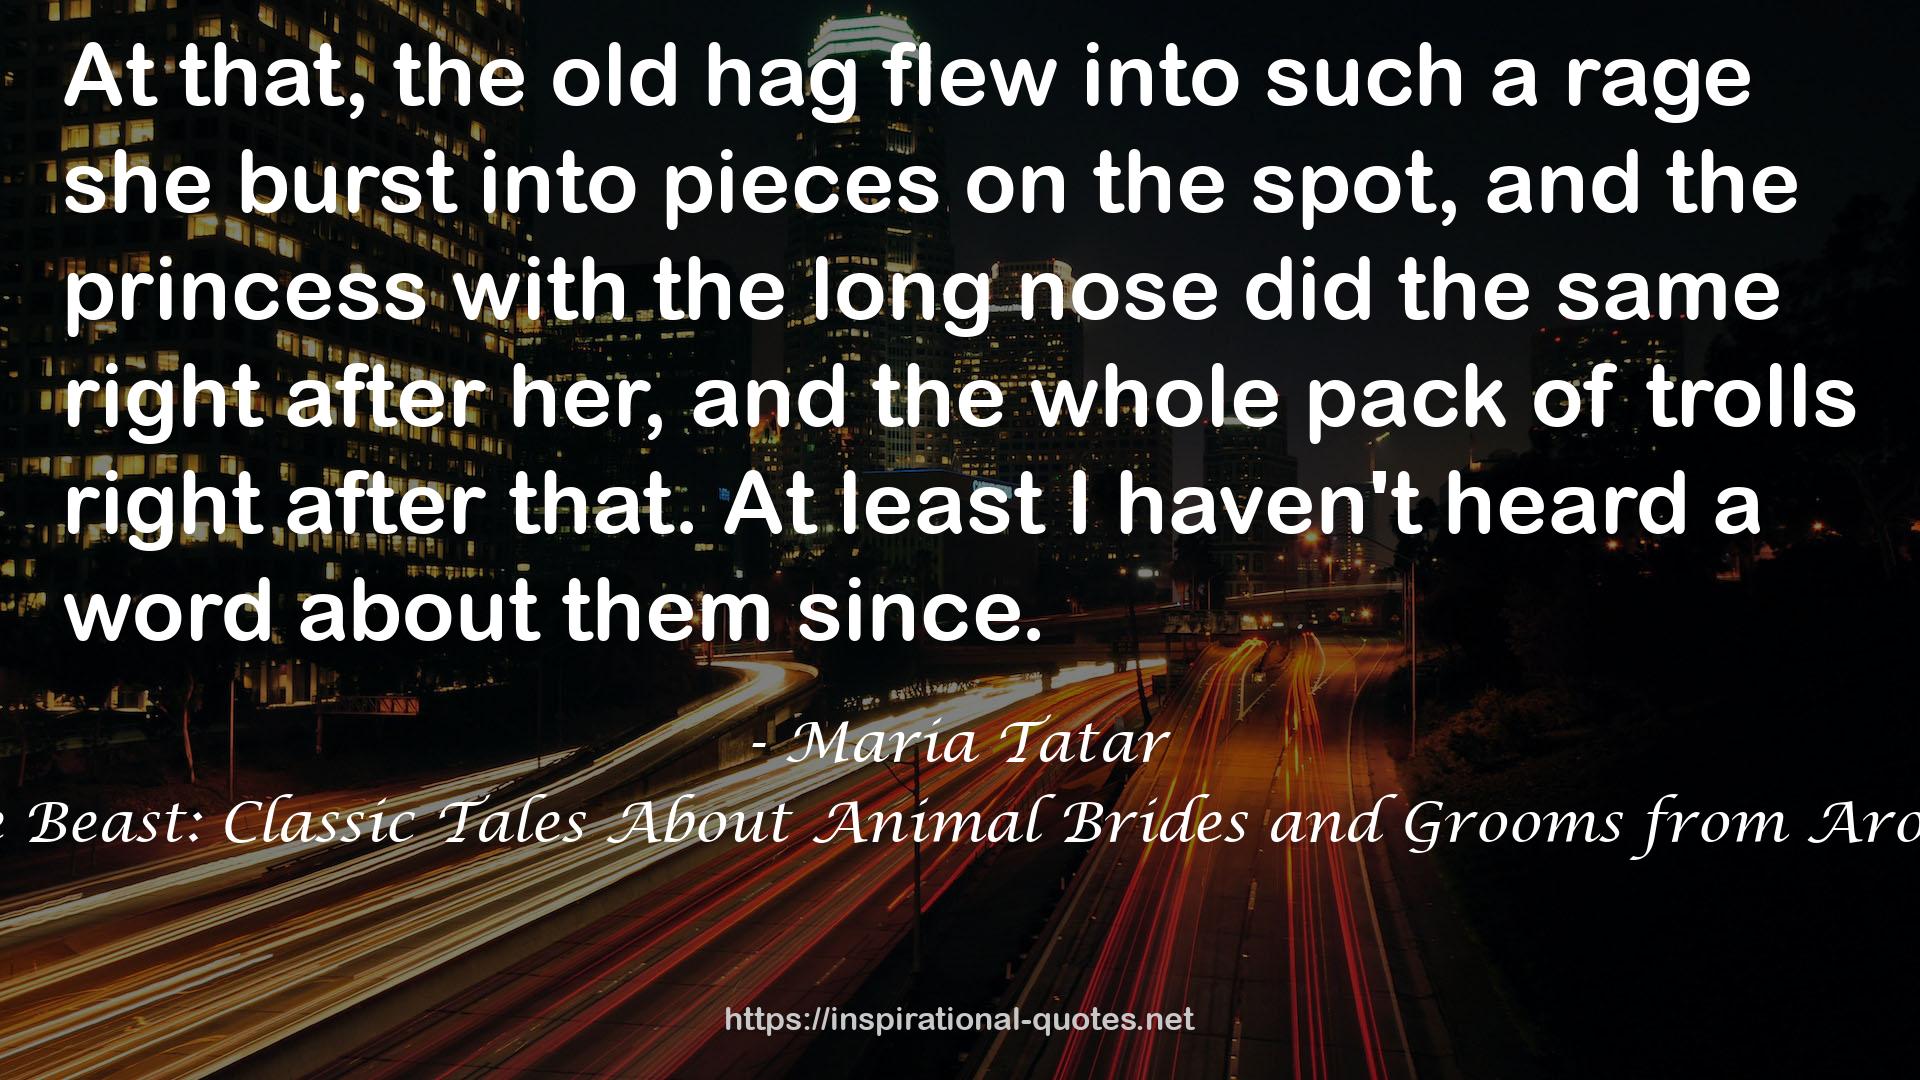 Beauty and the Beast: Classic Tales About Animal Brides and Grooms from Around the World QUOTES